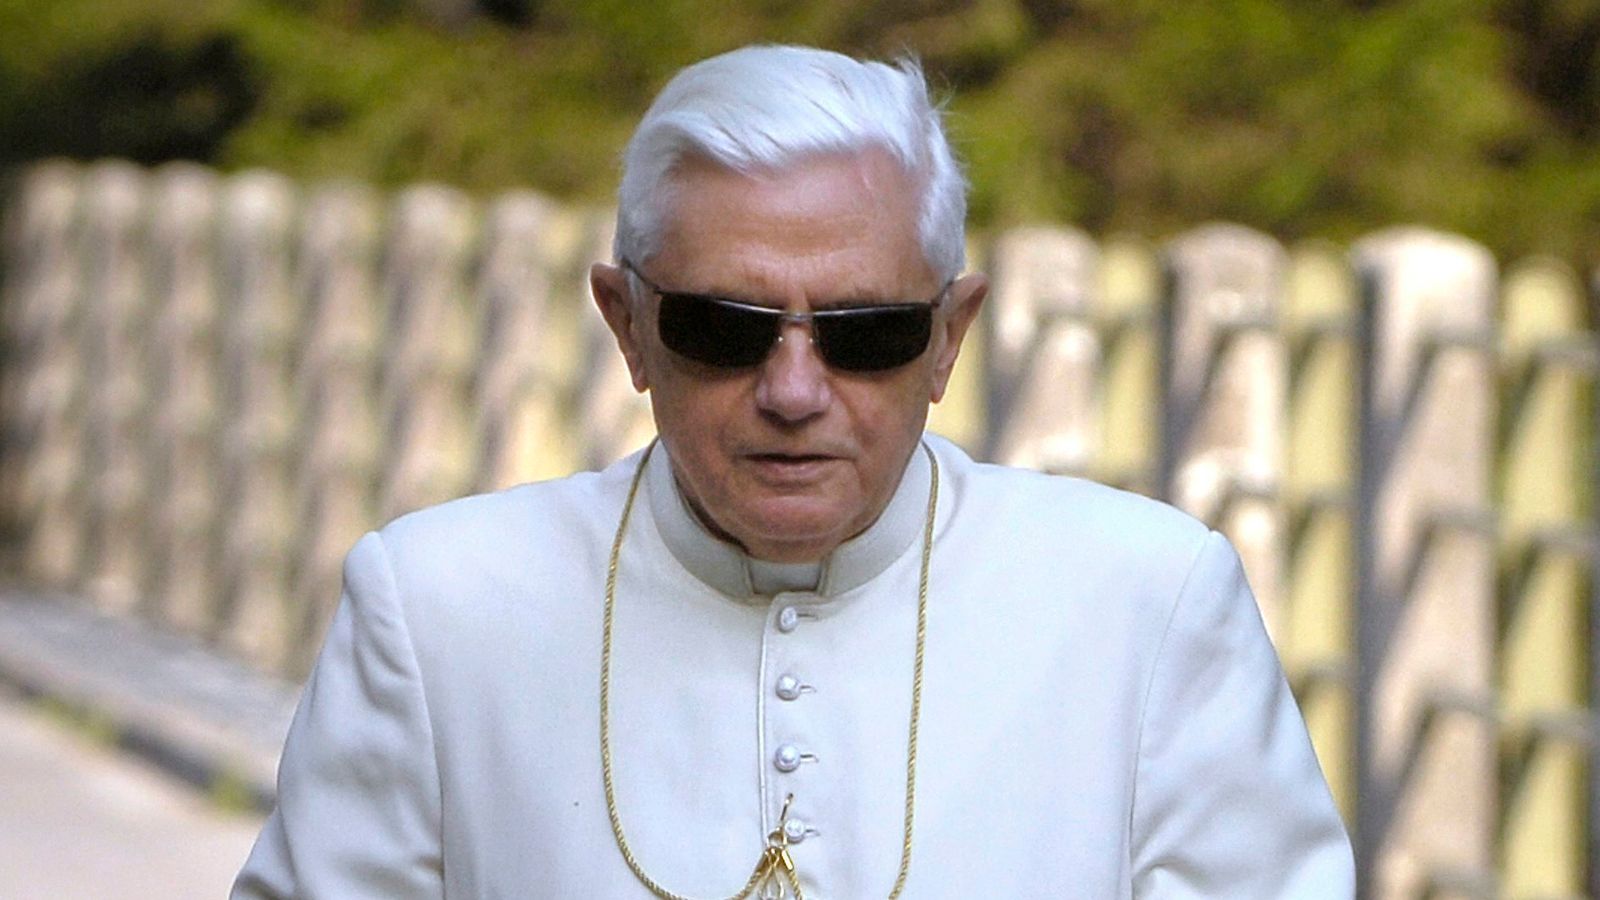 Pope Benedict XVI dies: Resignation of 'God's Rottweiler' shocked the world - and he continued to be controversial